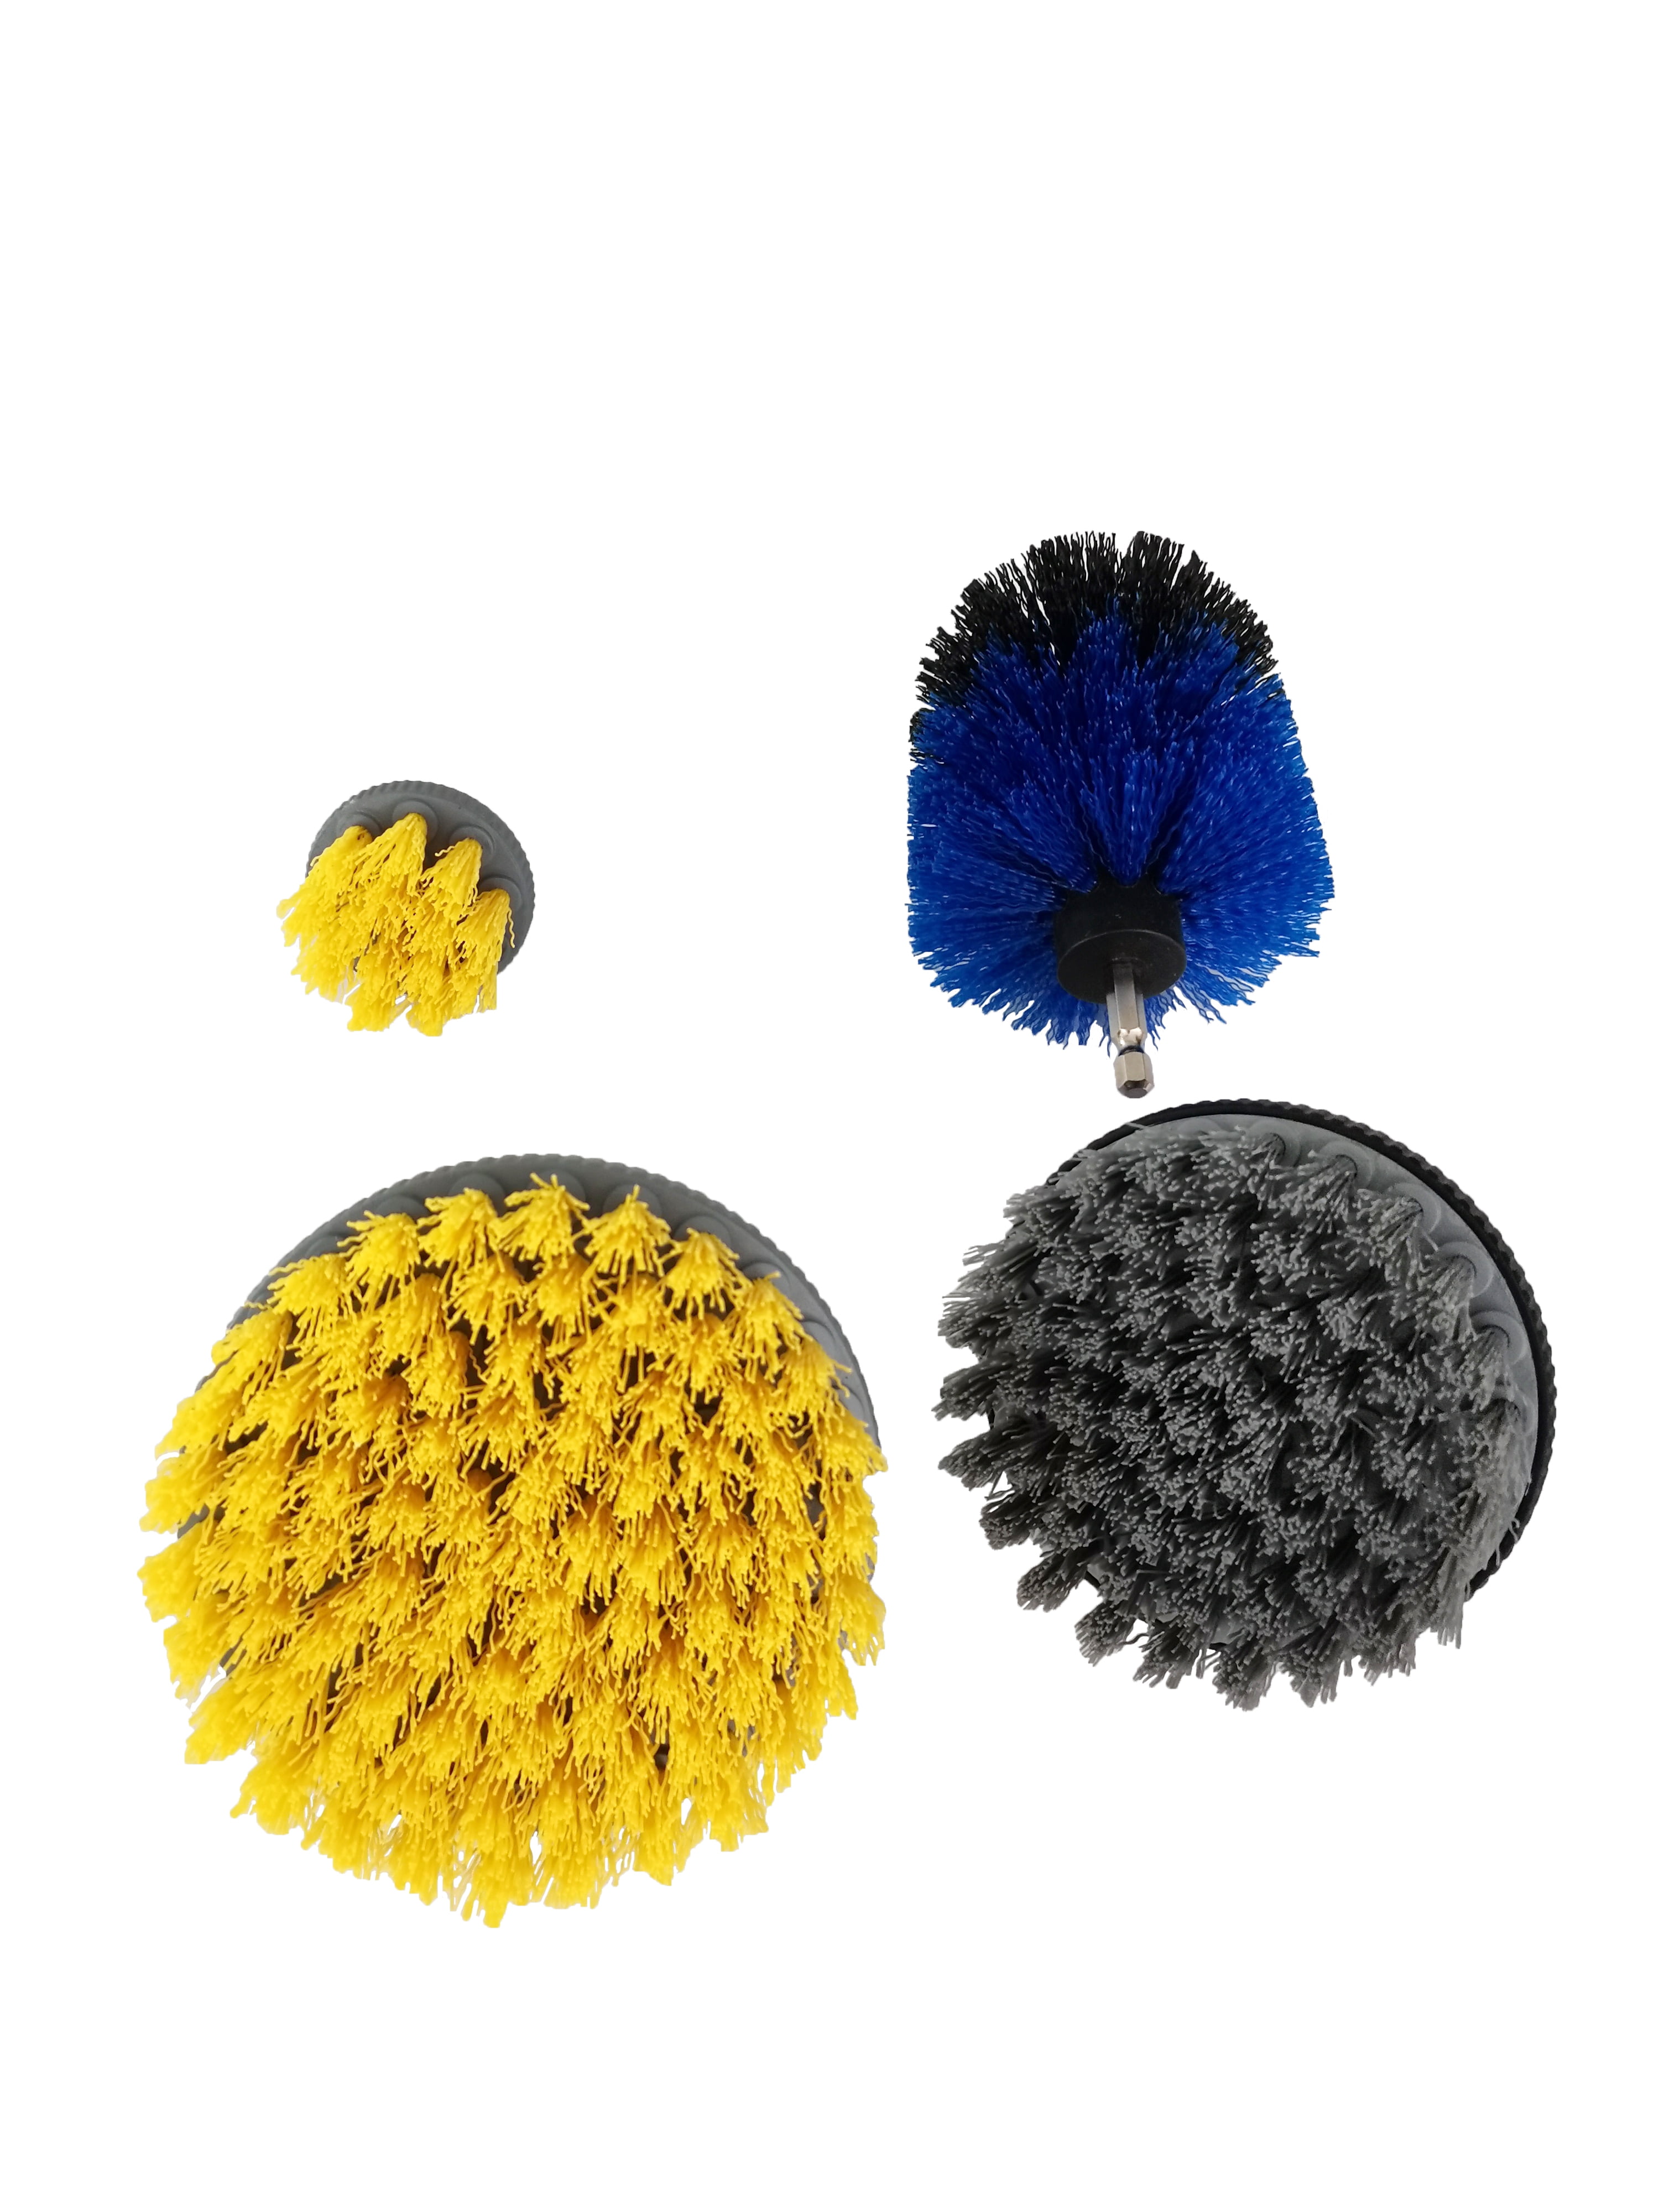 Auto Drive Brand 2/3.5/4/5 Drill Brush Cleaning Kit for Car , Household  Cleaning Brush Type. 